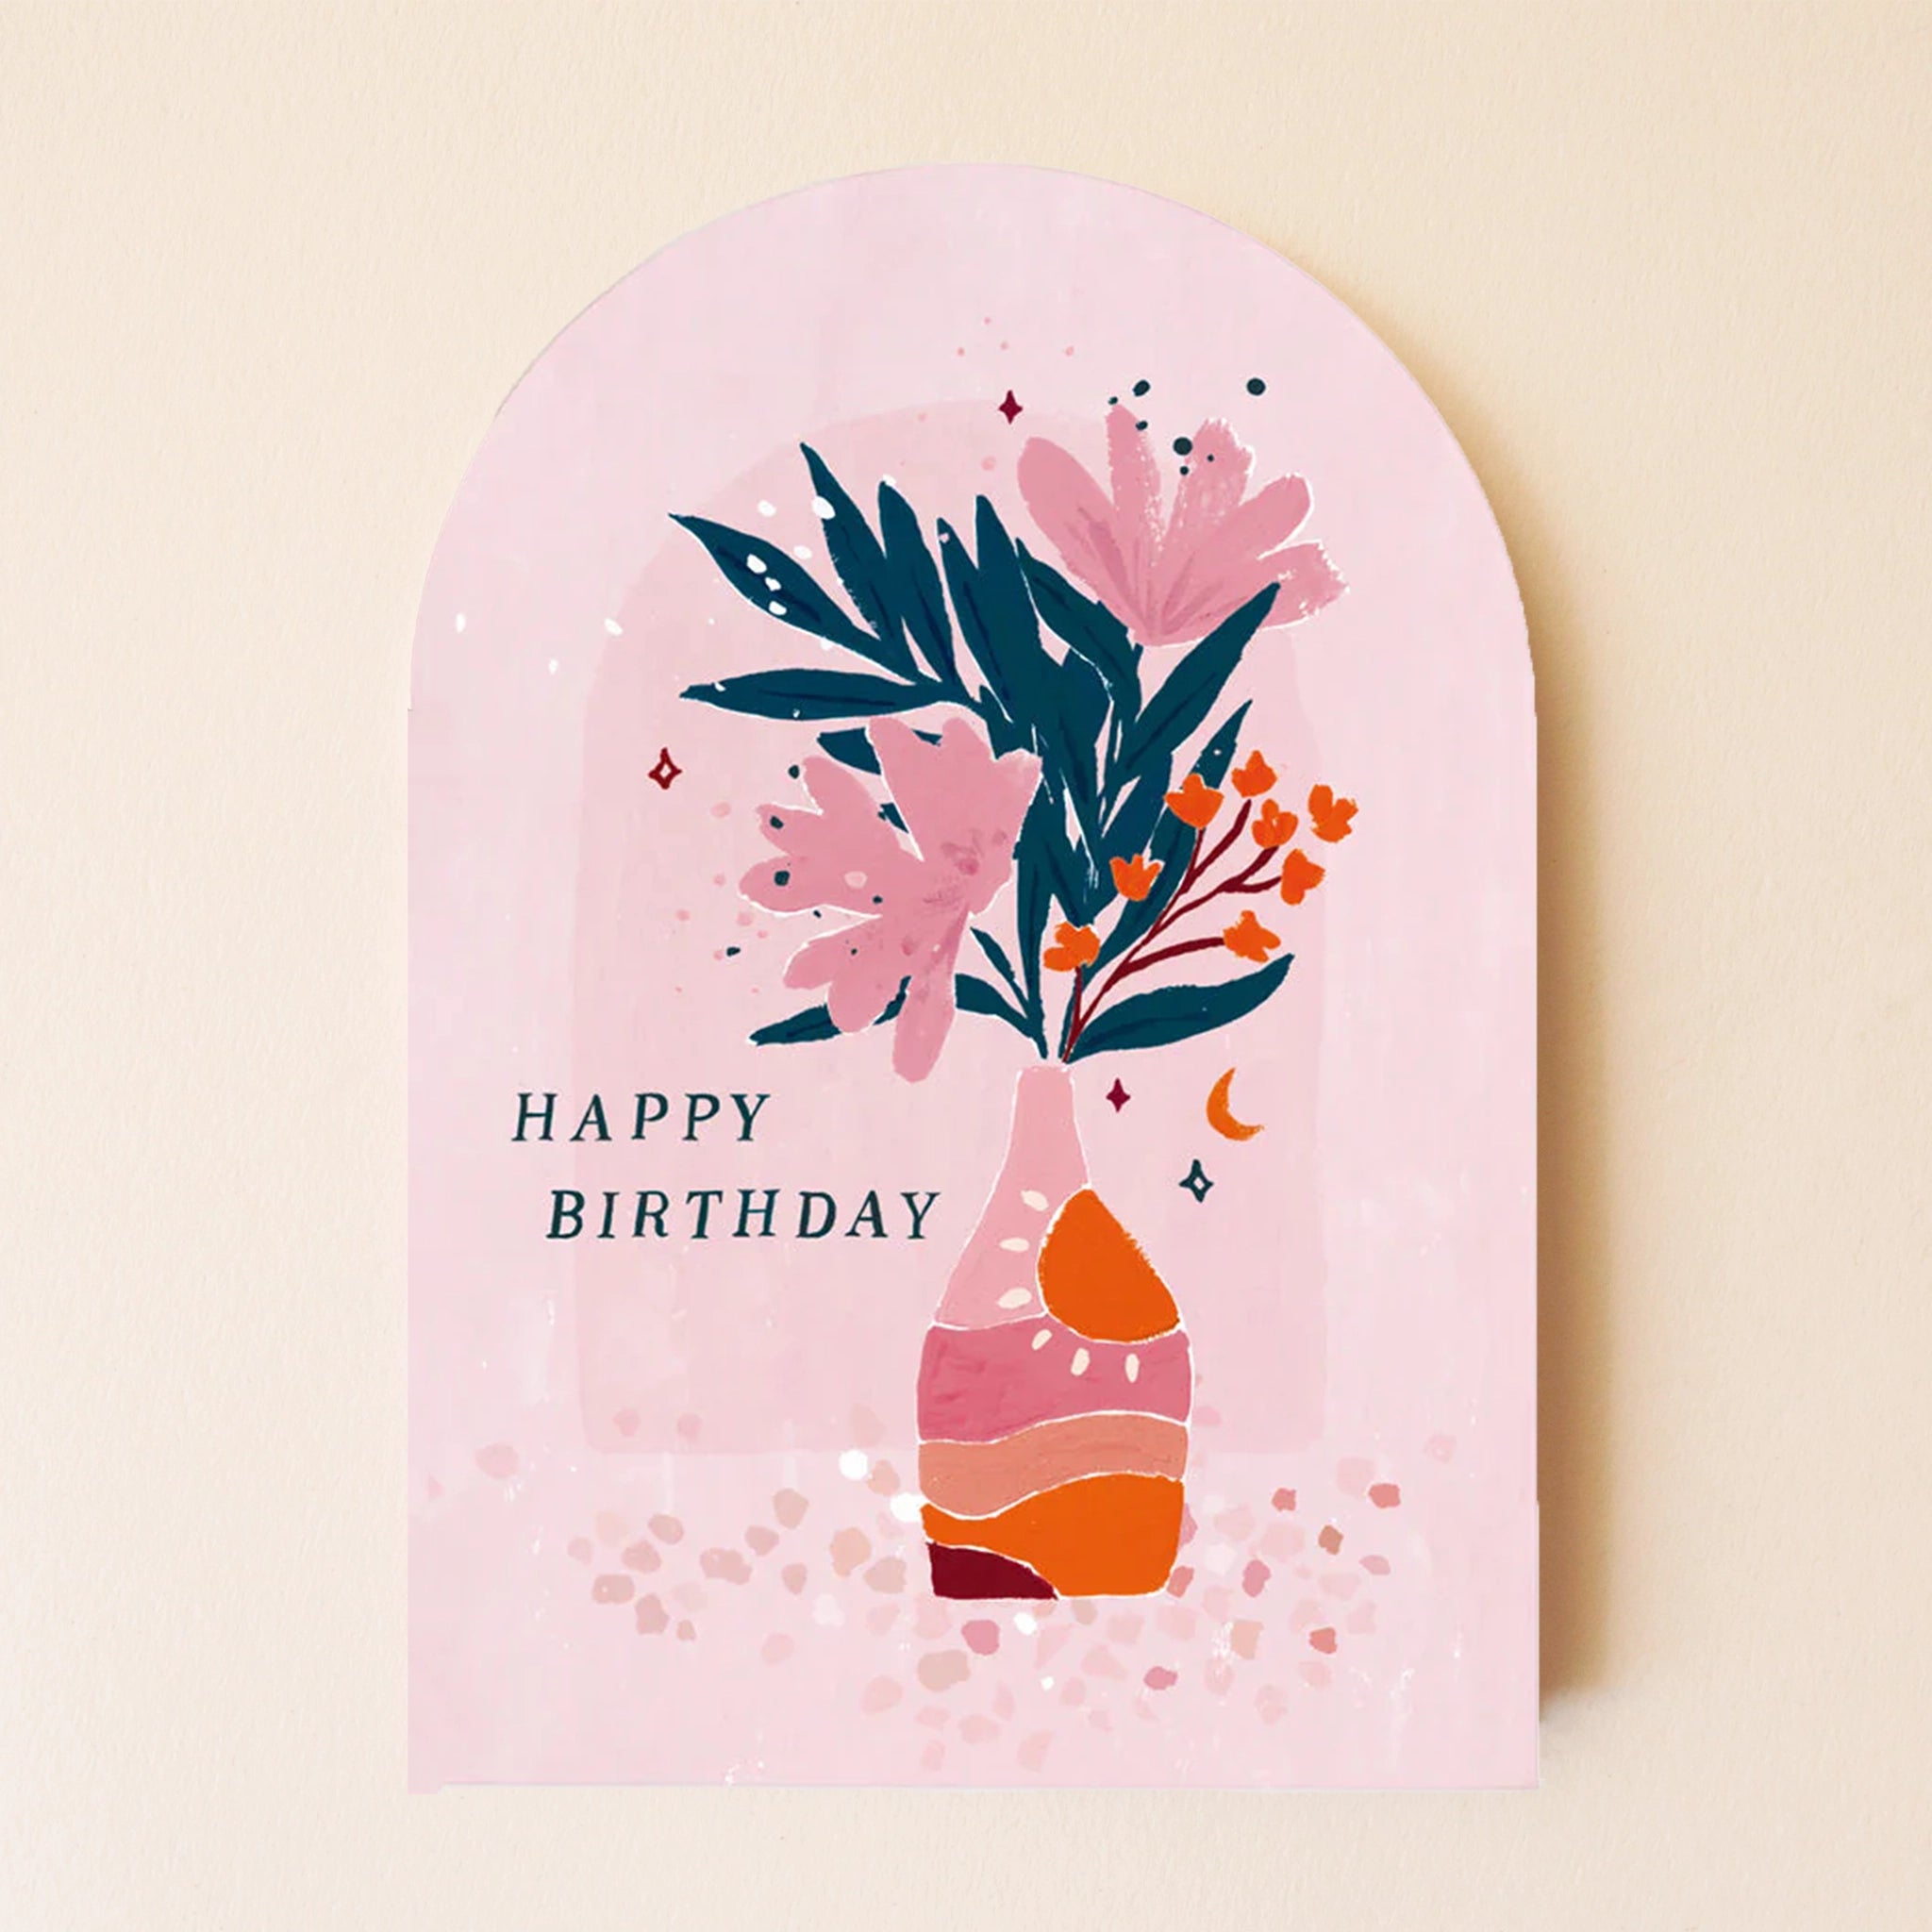 A pink arched birthday card with an illustration of a pink and orange striped vase with a green, pink and orange flower arrangement inside as well as text on the left that reads &quot;Happy Birthday&quot;.